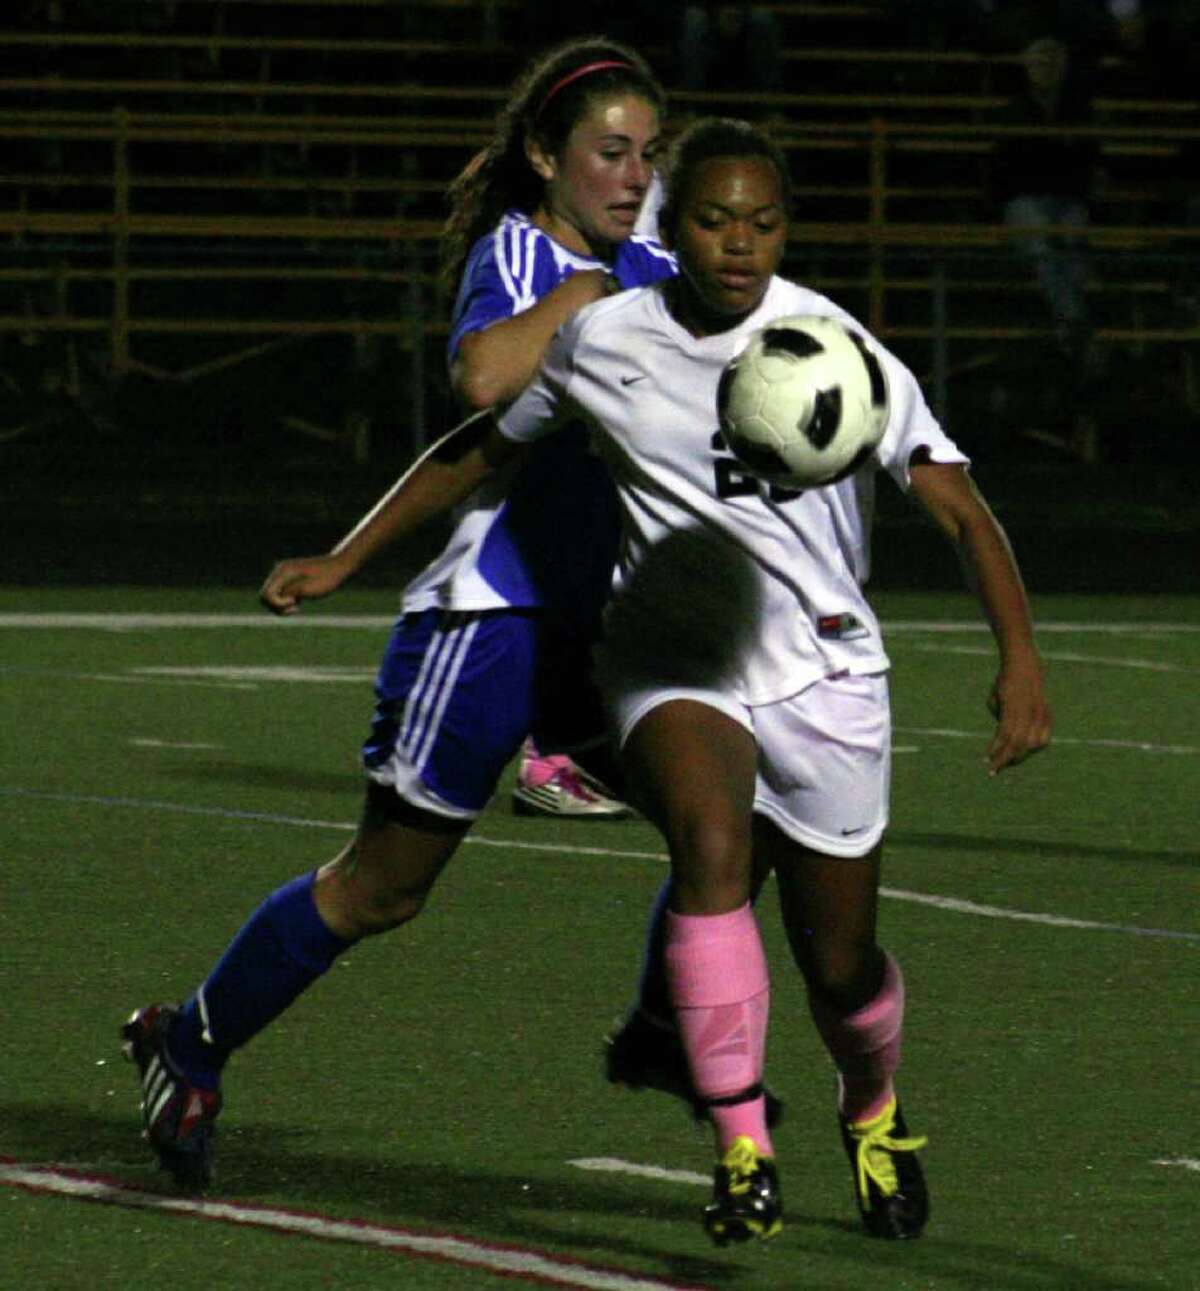 Ludlowe's Gabby Rudolph battles Trumbull's Taylor Pratcher for the ball in the Falcons' 0-0 tie with the Eagles on Monday night at Trumbull High School.